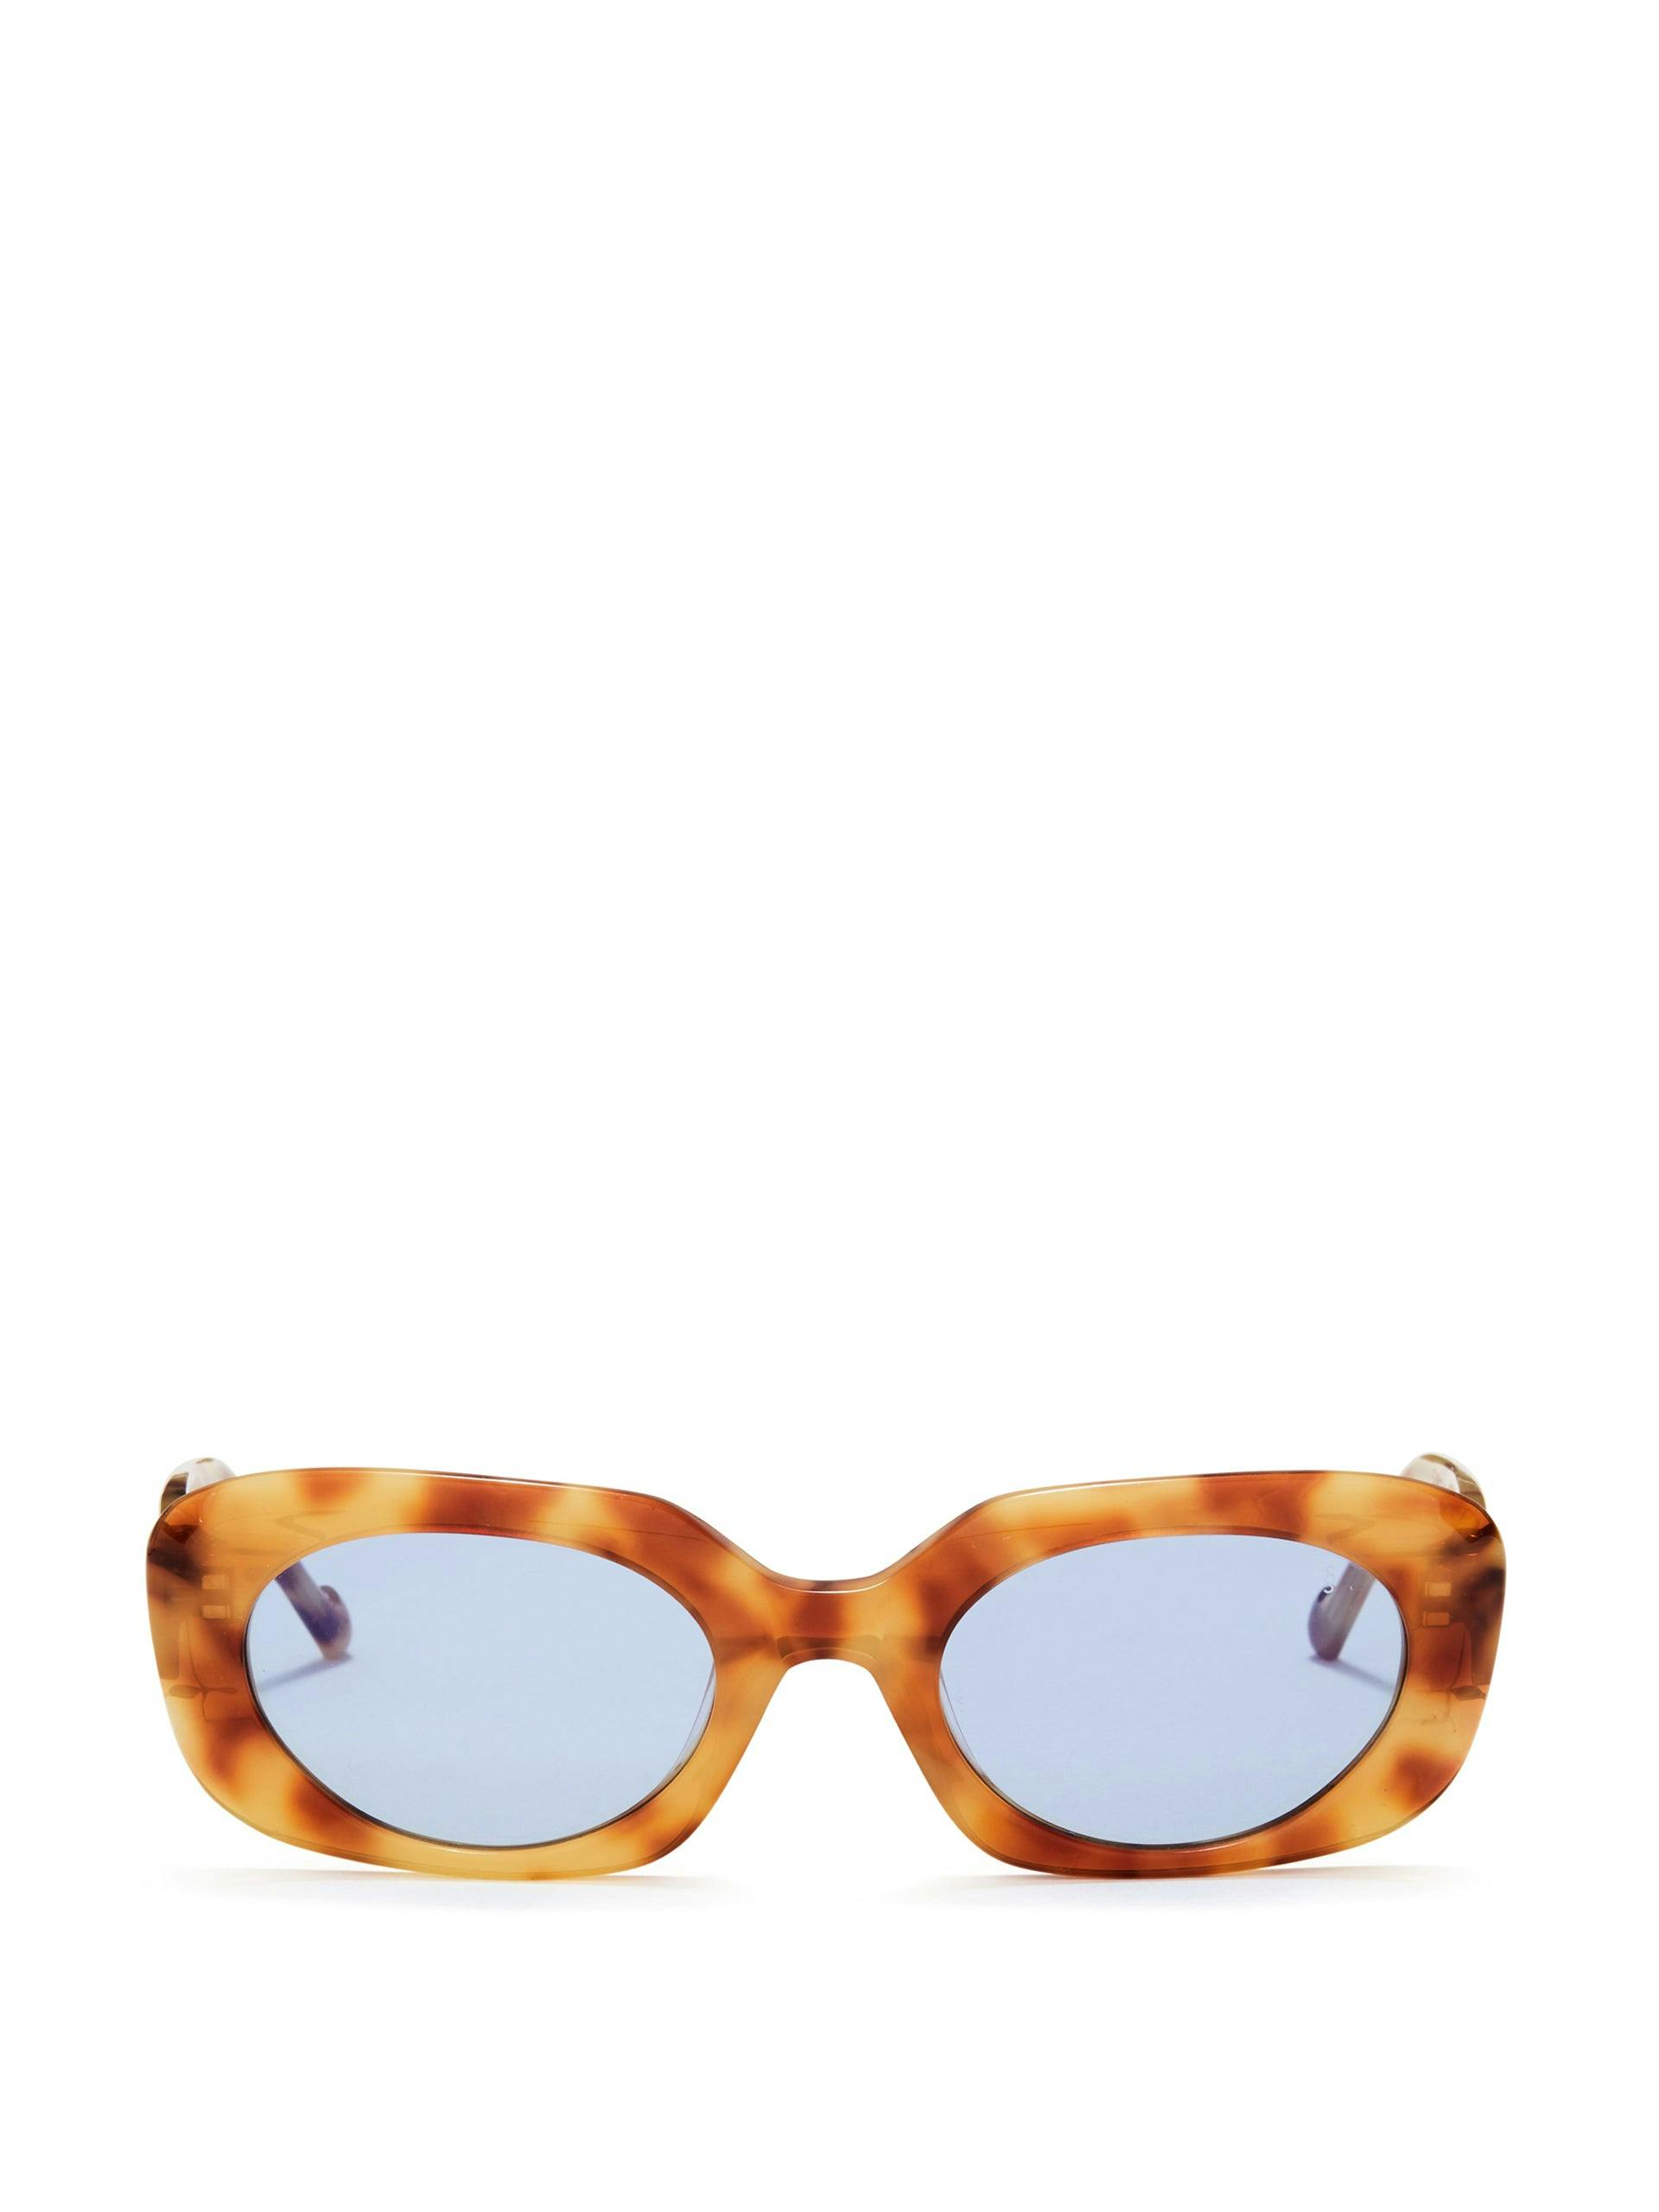 Cindy sunglasses in tiger tort